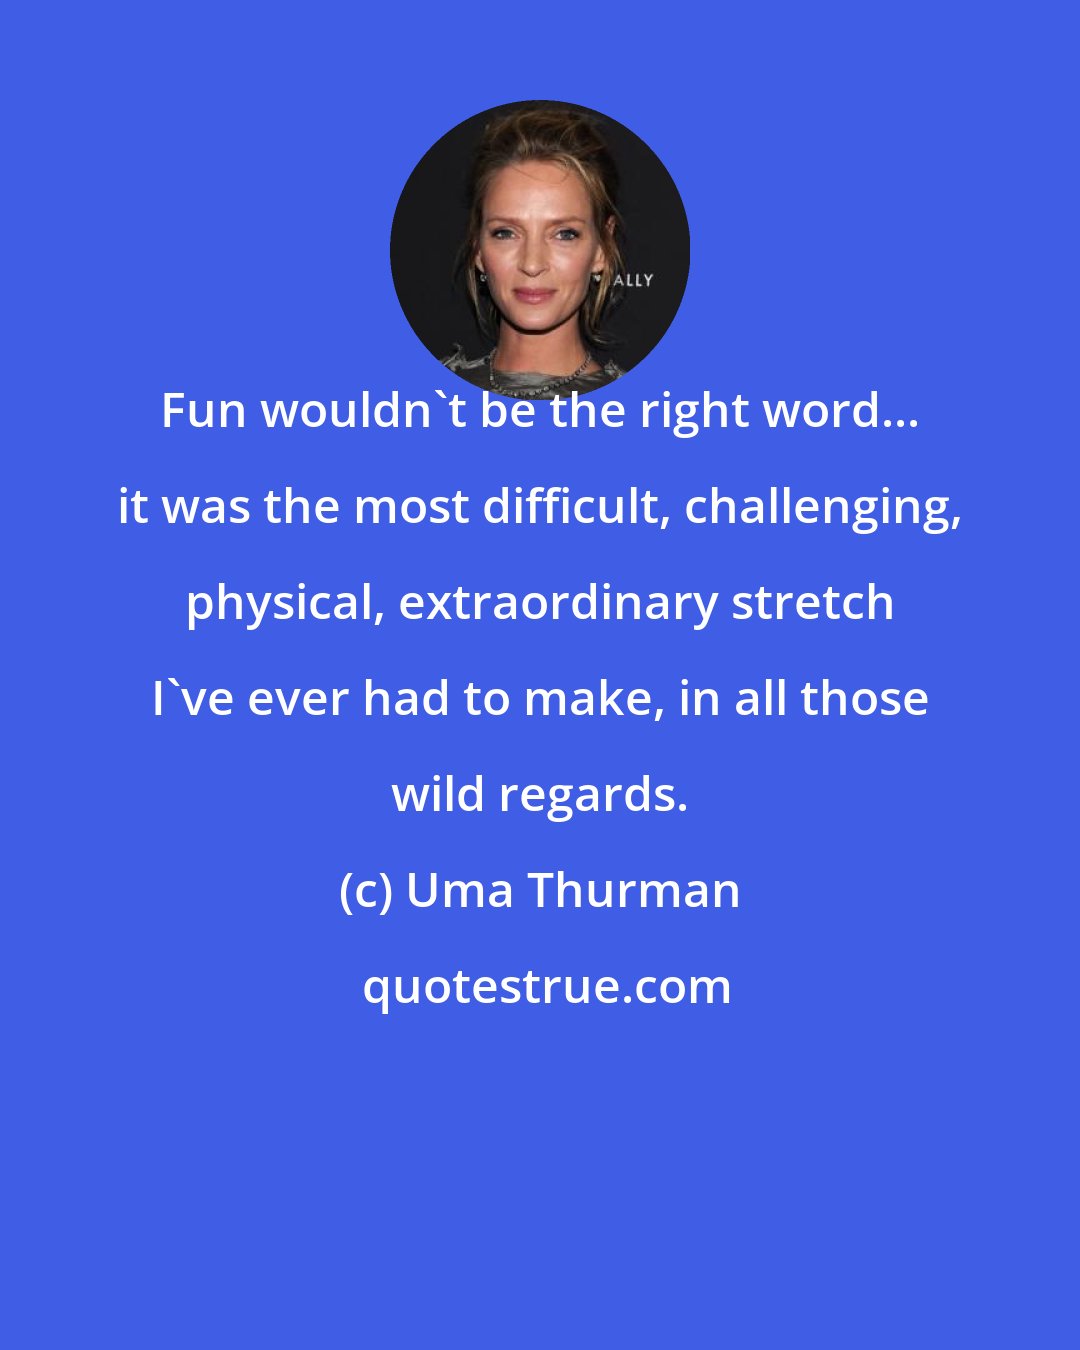 Uma Thurman: Fun wouldn't be the right word... it was the most difficult, challenging, physical, extraordinary stretch I've ever had to make, in all those wild regards.